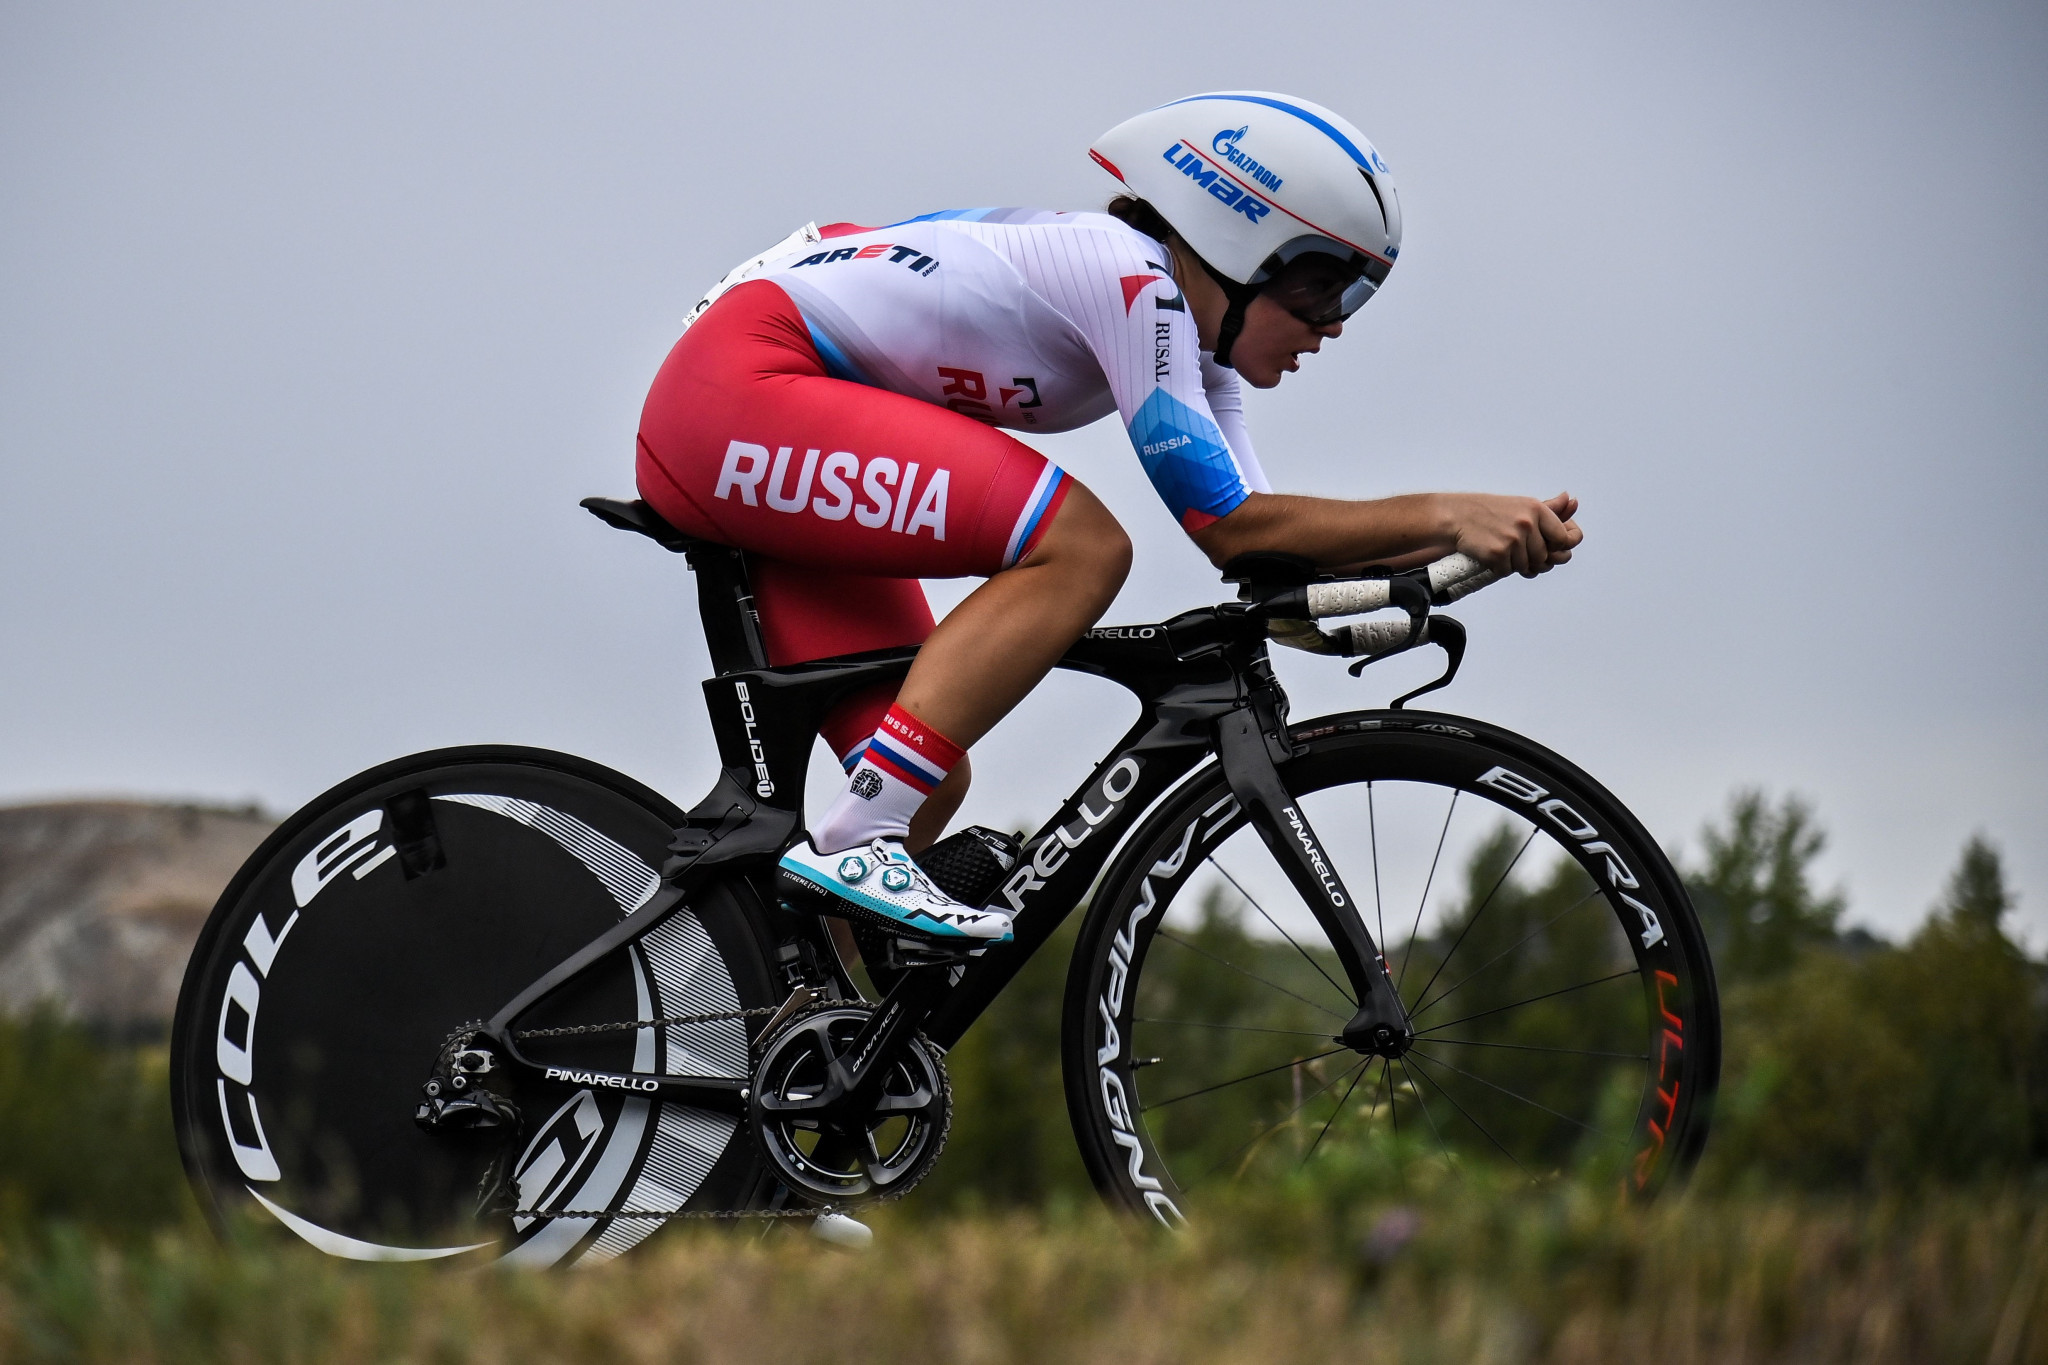 Russian and Belarusian teams have been banned from all UCI competitions ©Getty Images